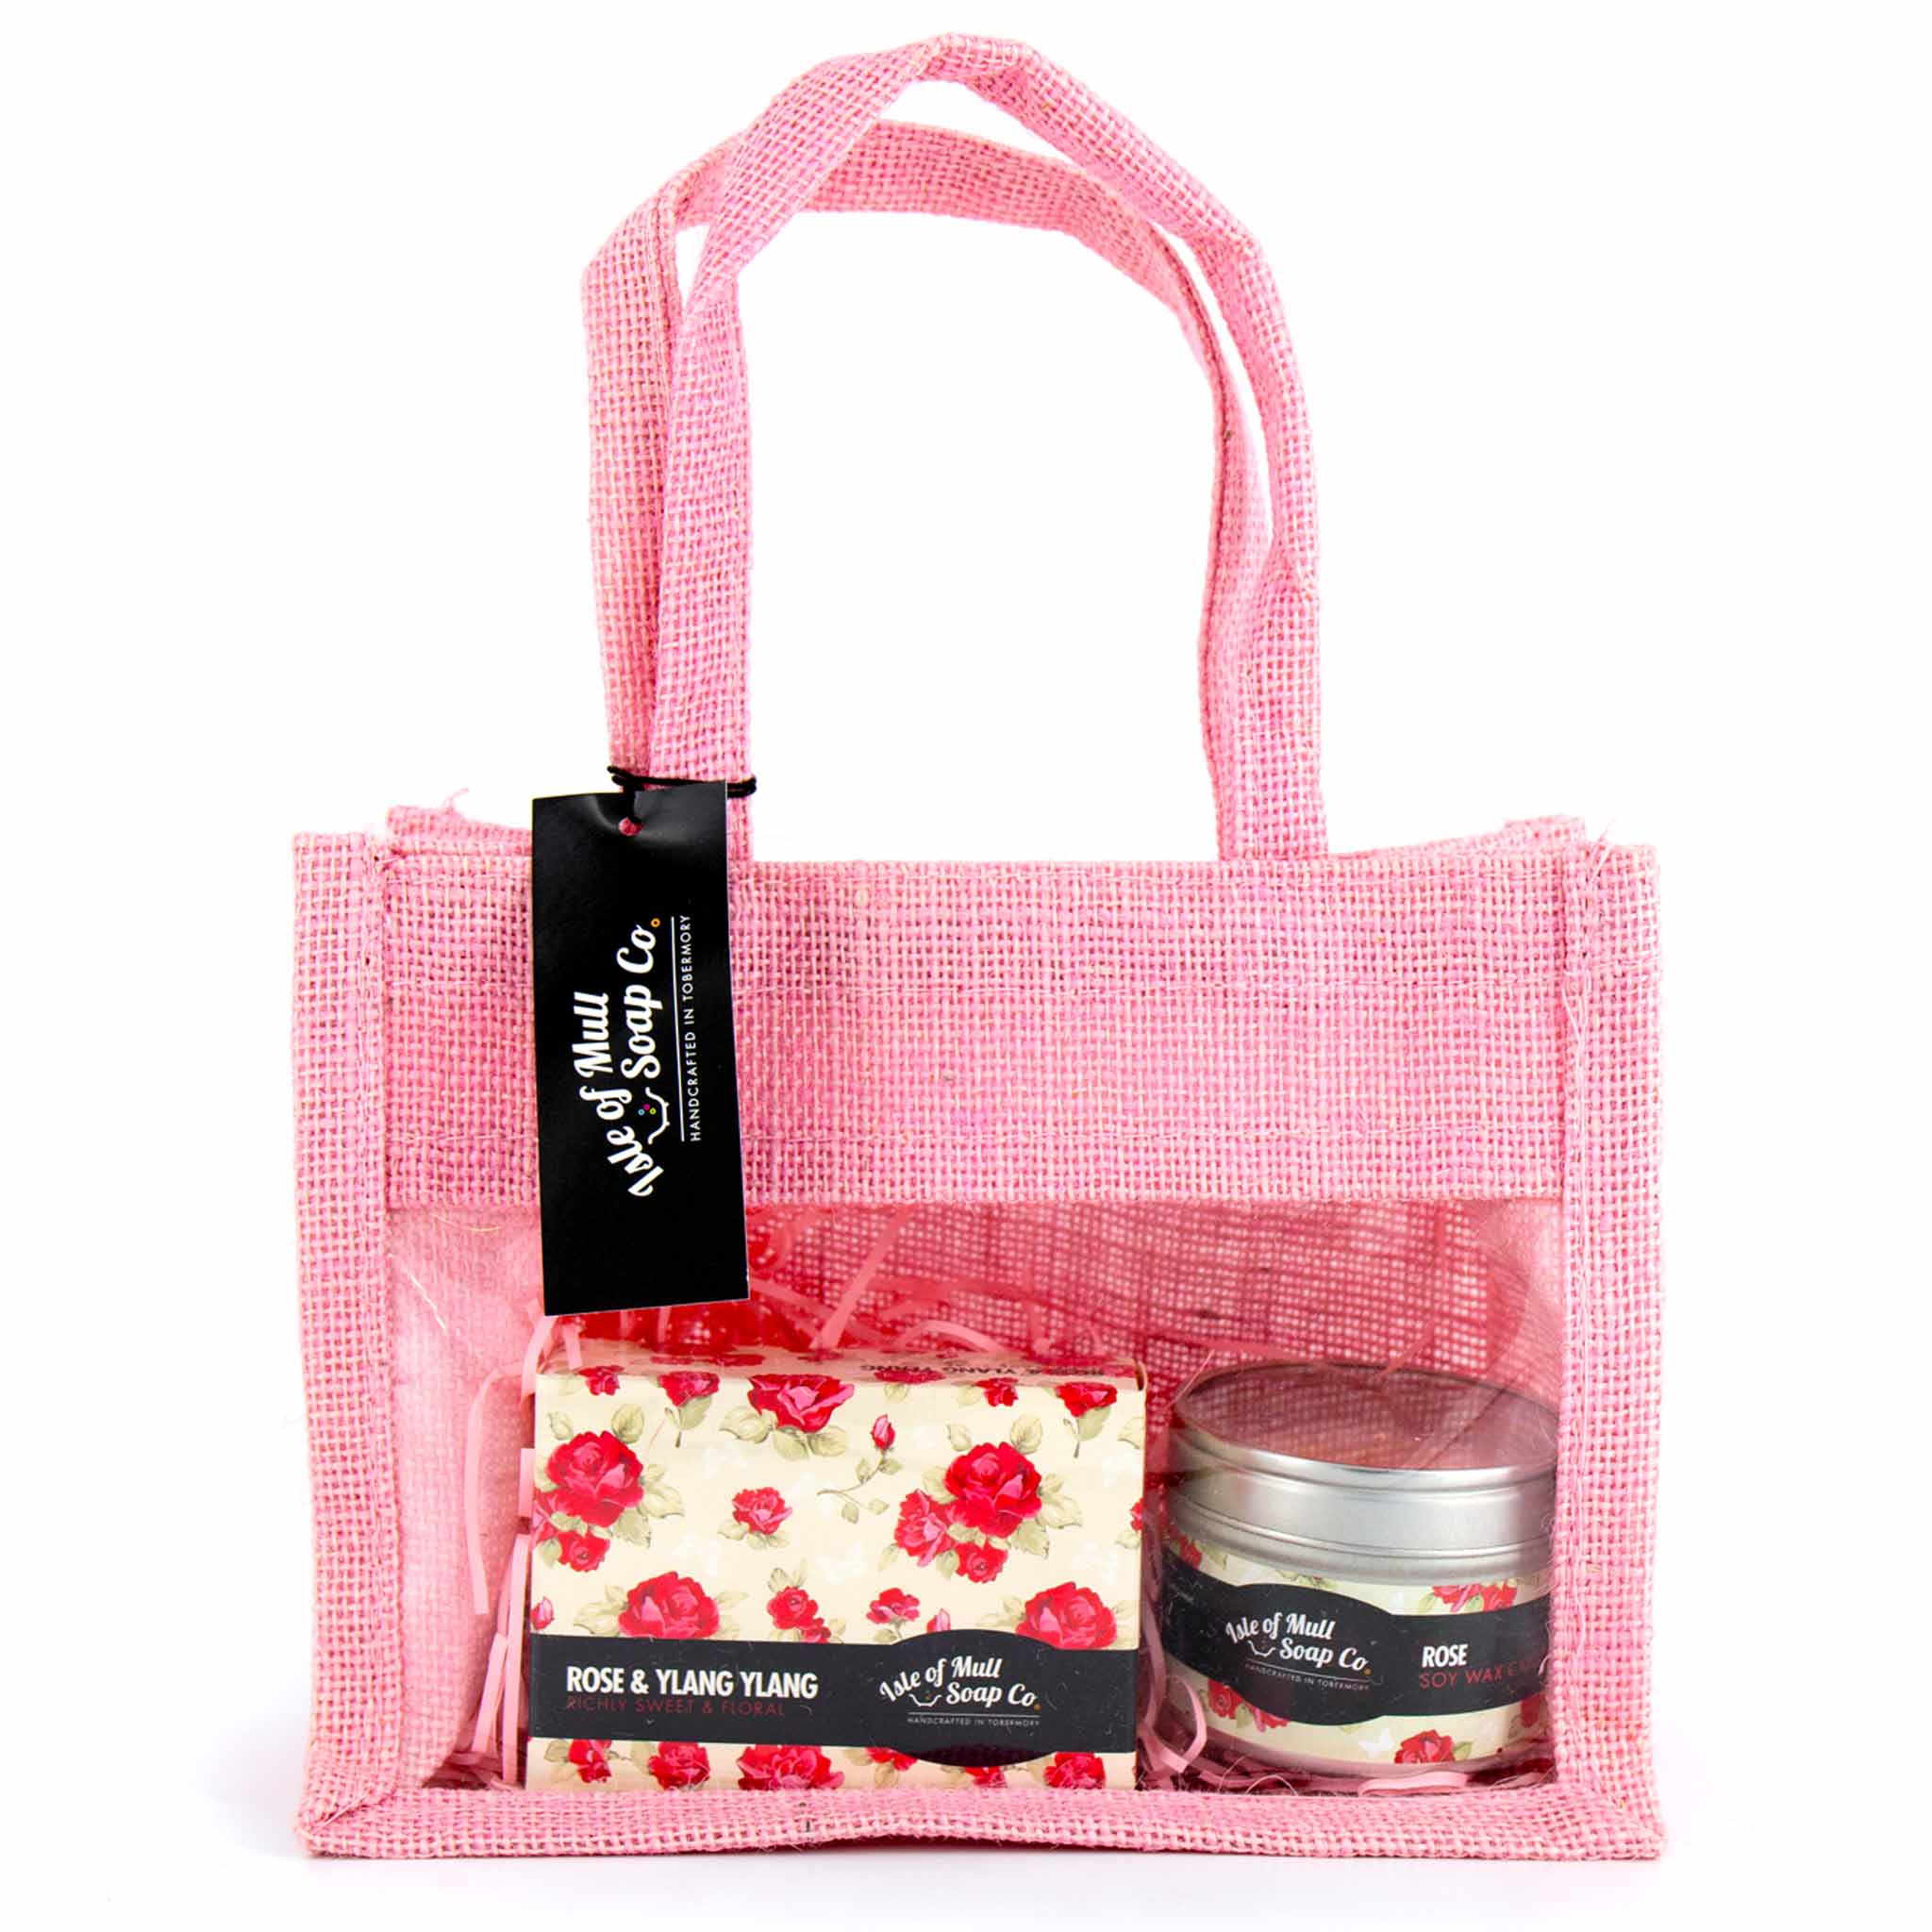 Double Jute Bag Soap & Candle - Rose & Ylang